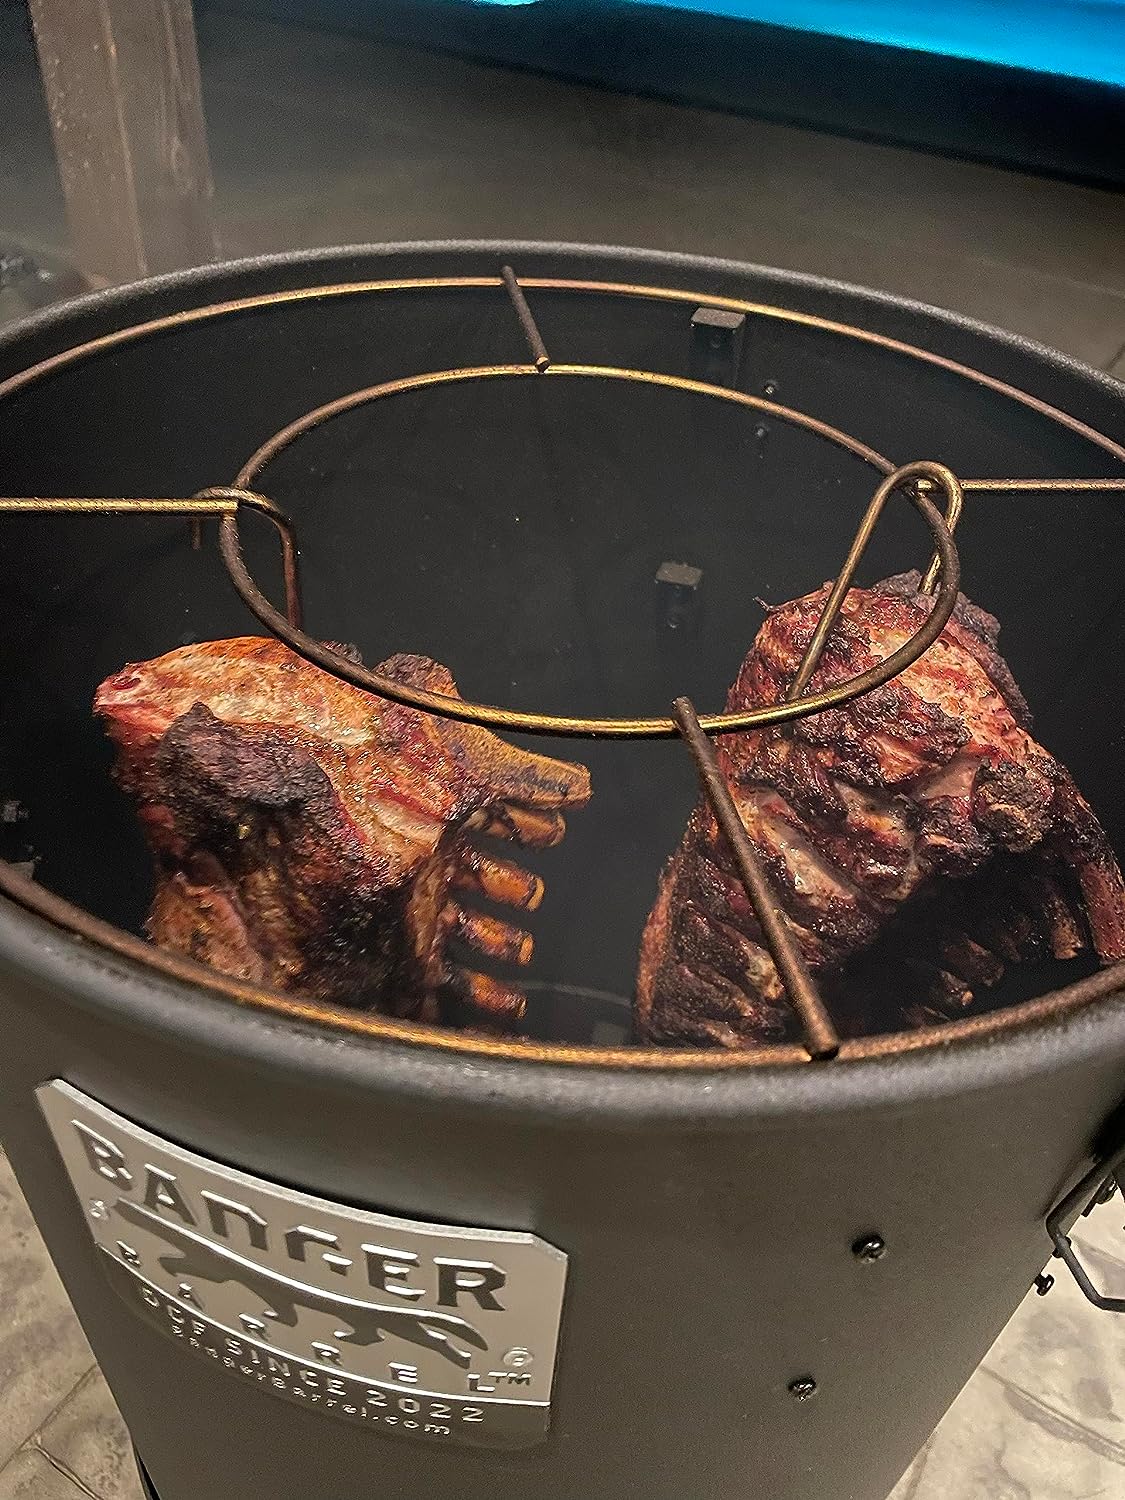 badger barrel bbq 16 drum style smoker review